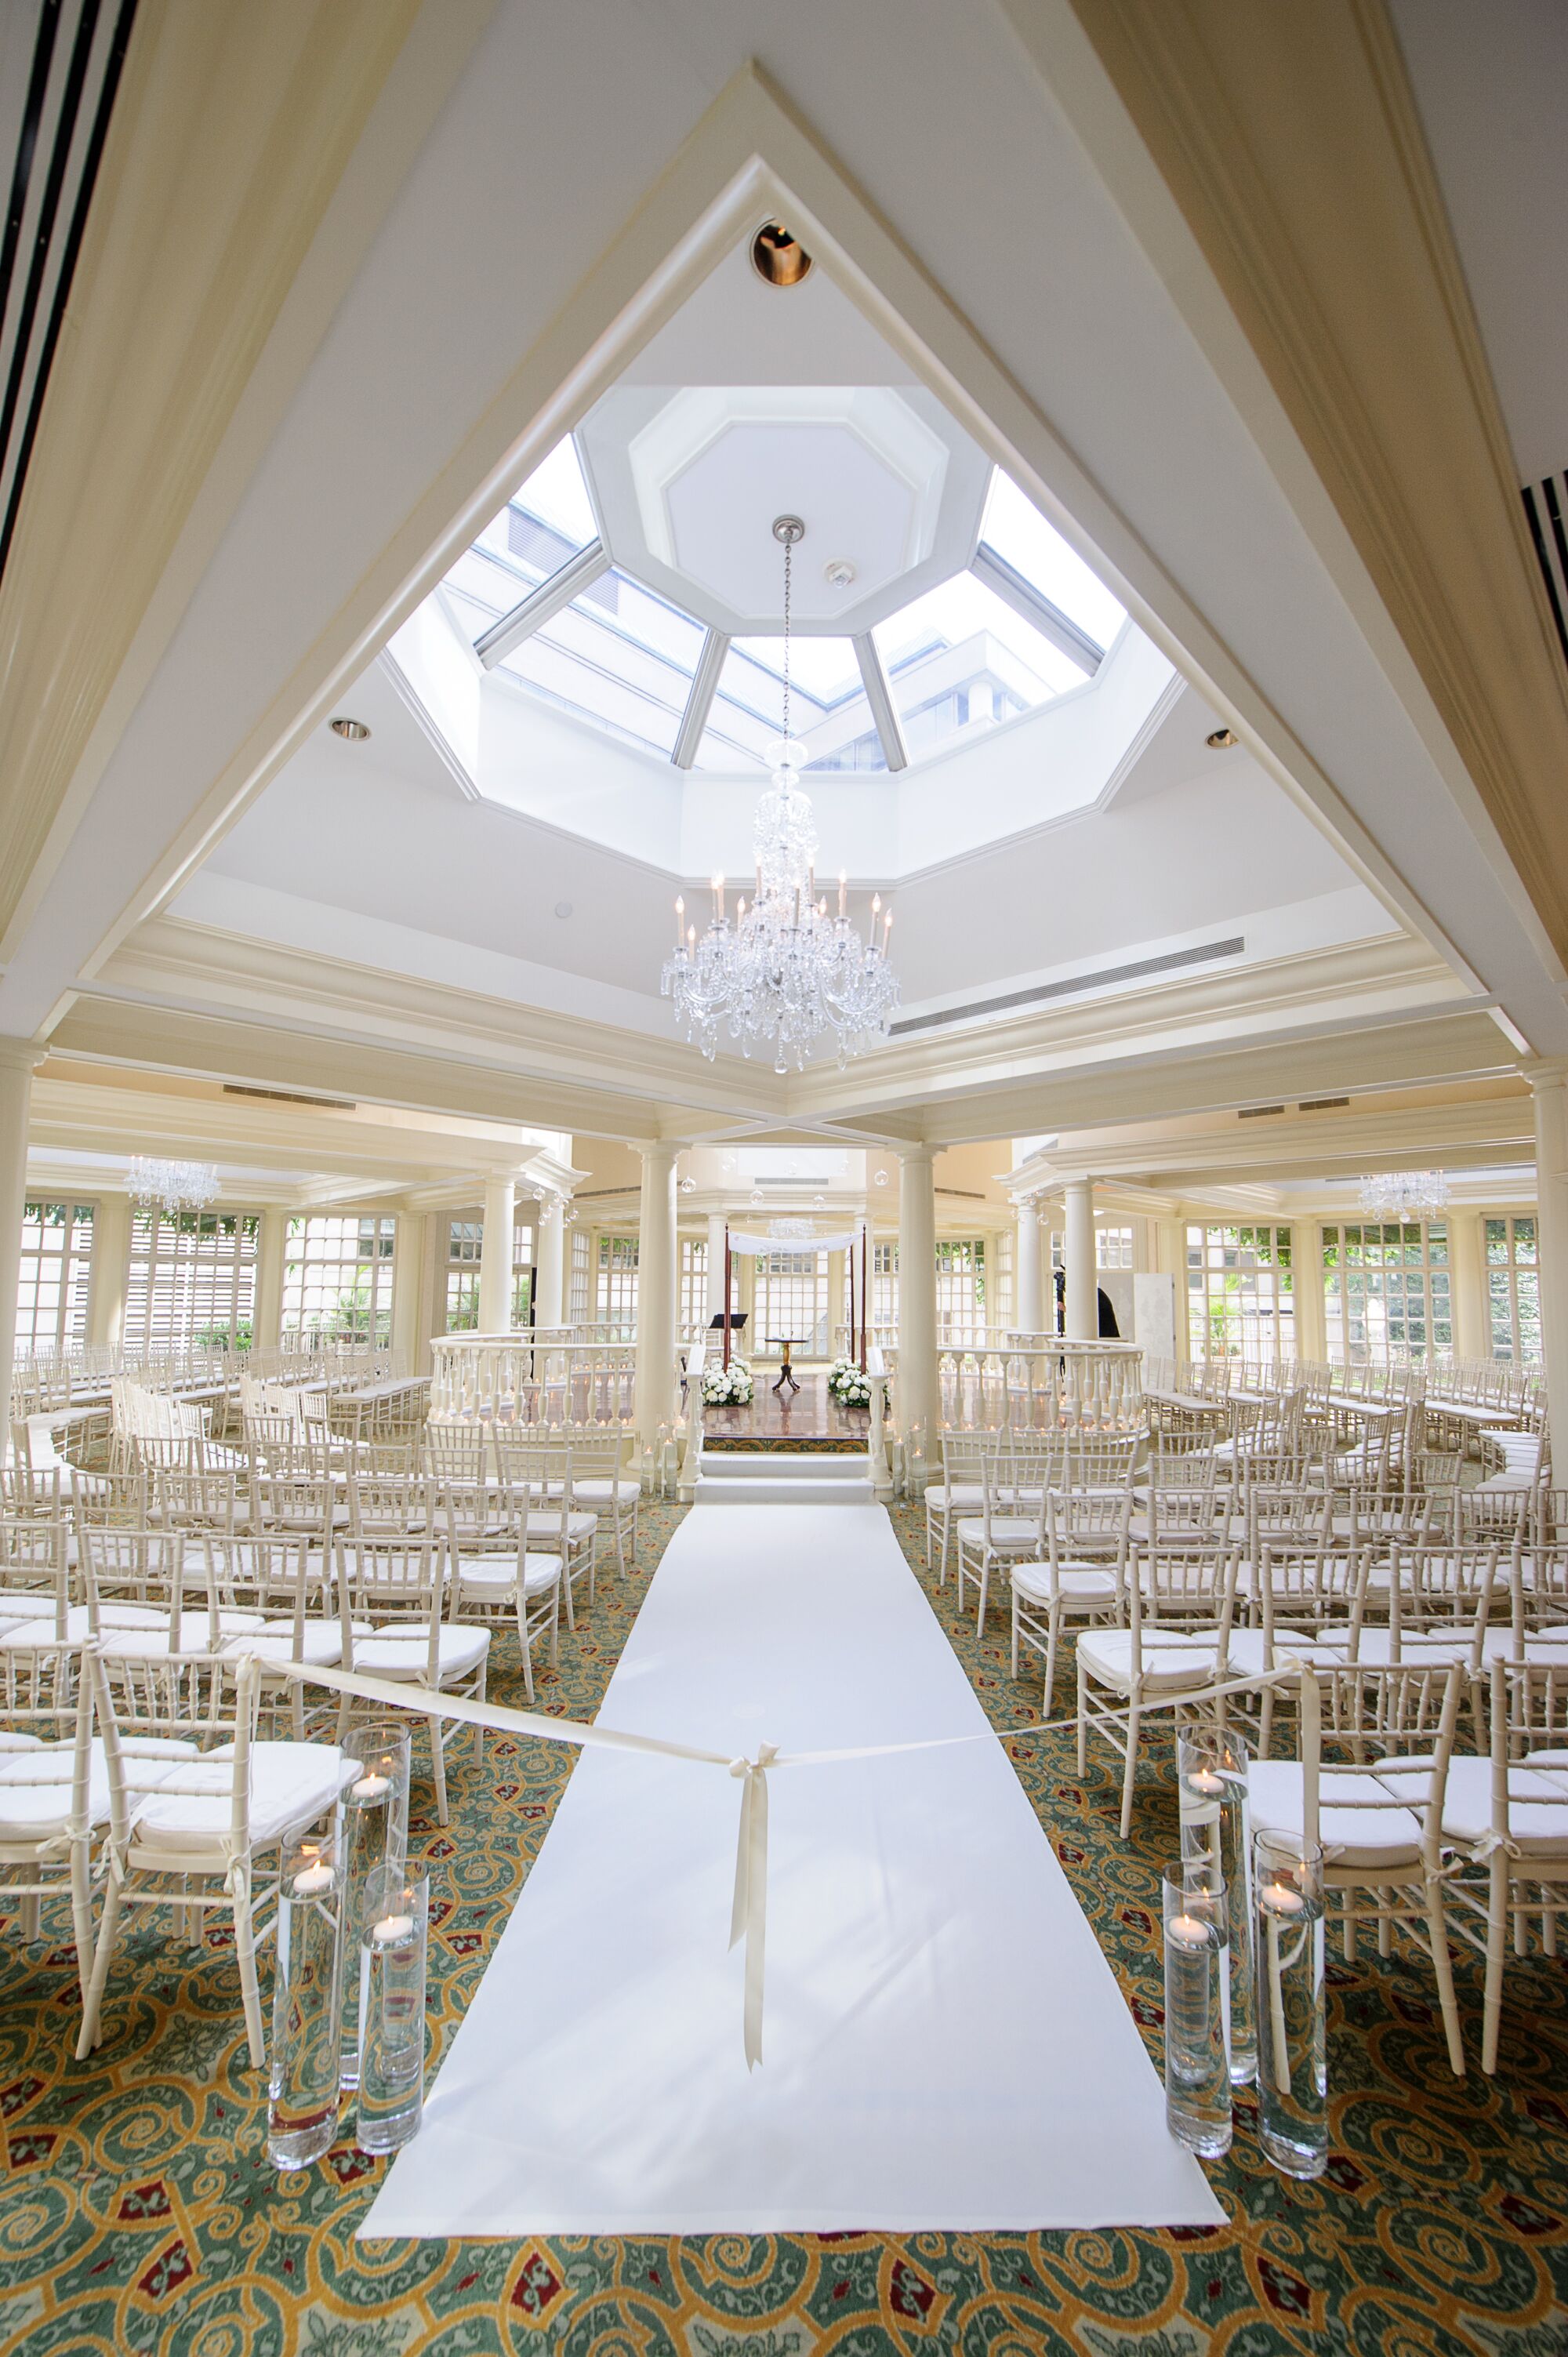 Fairmont Hotel Colonnade Room Ceremony